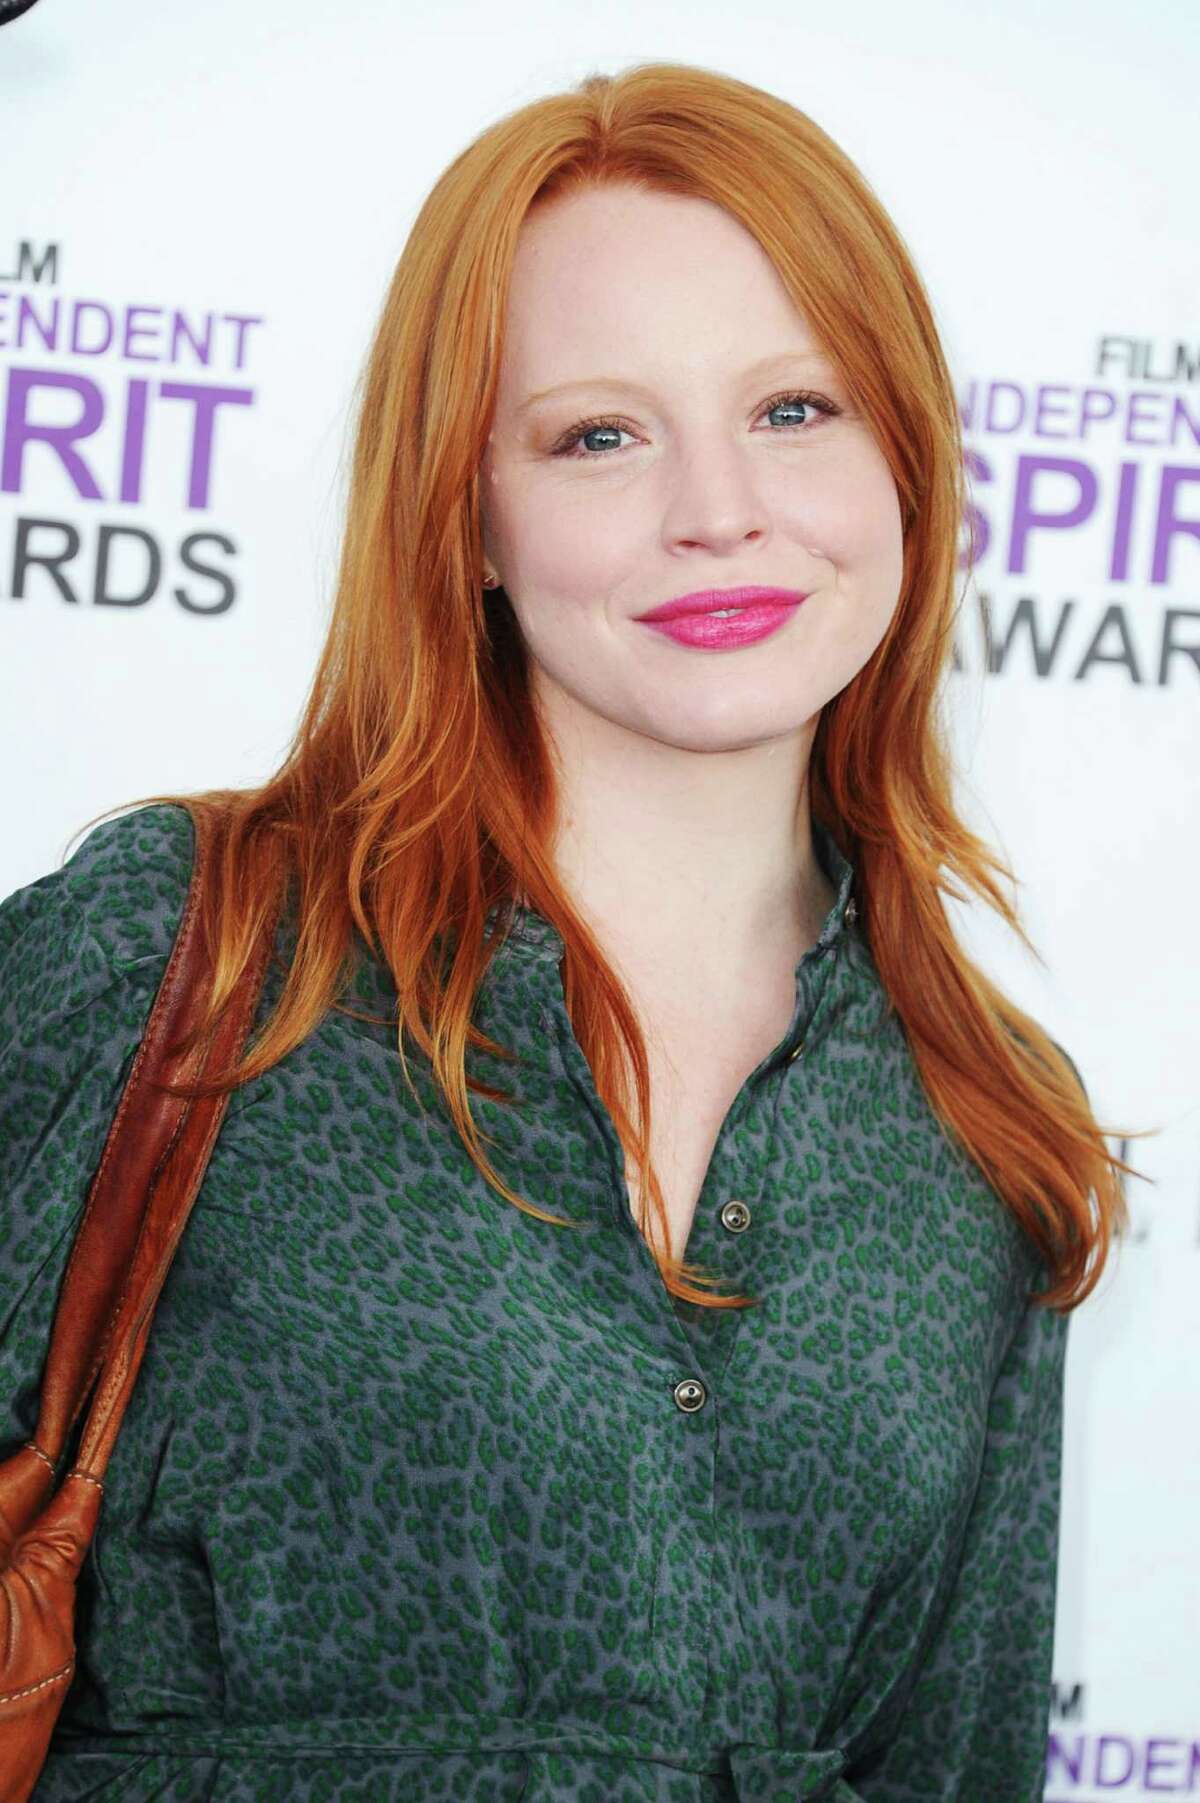 Lauren Ambrose, who was born in New Haven, is back on the 11th season of "The X-Files," where she plays special agent Einstein, a young FBI recruit. New episodes premiere on Jan. 3 on FOX.